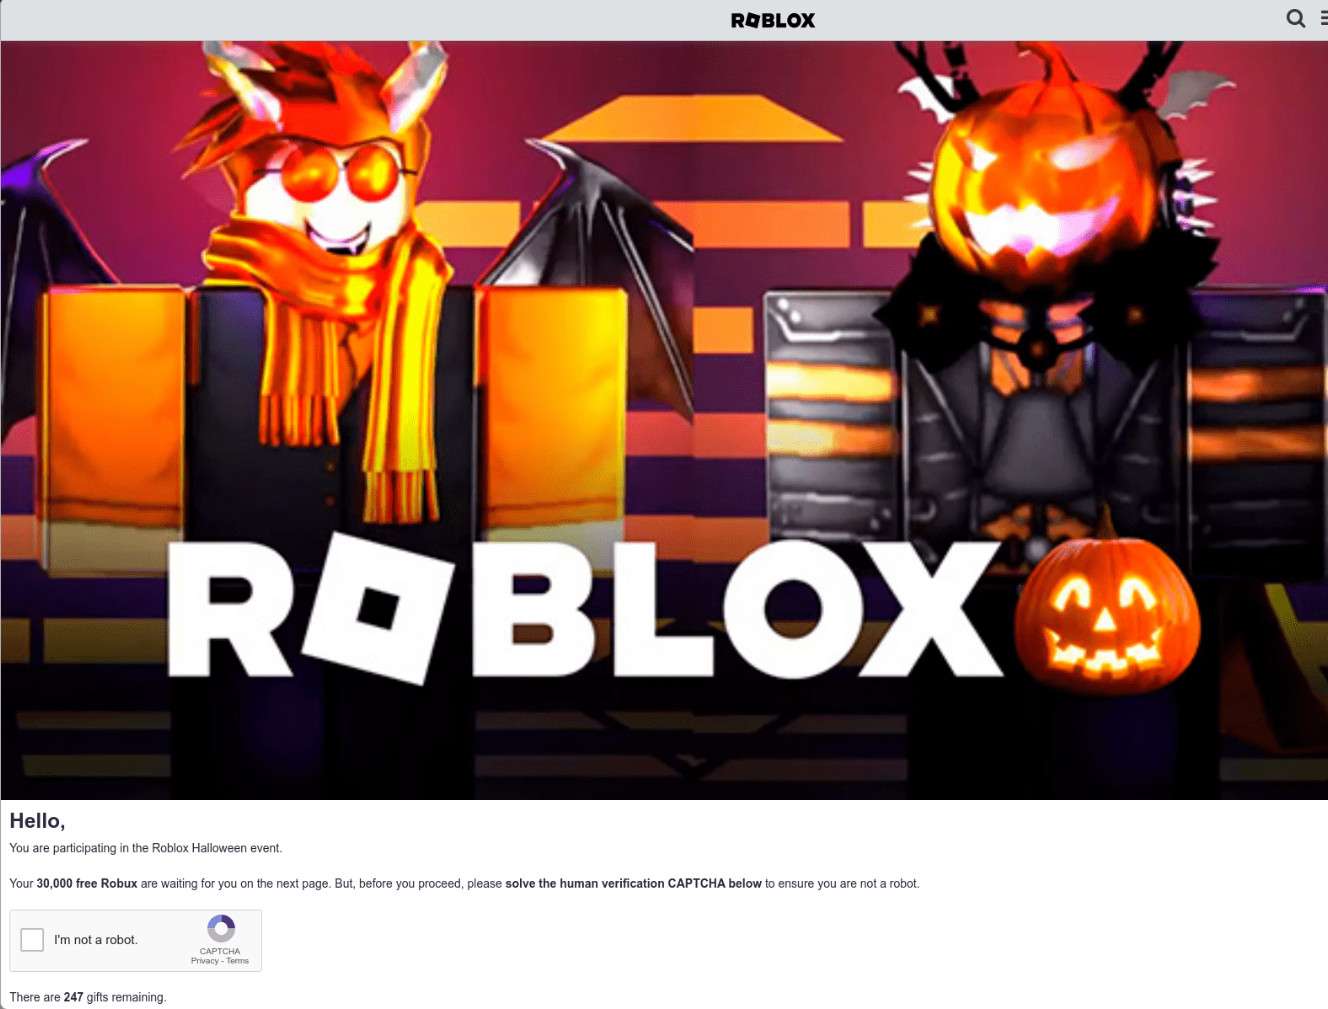 Opera One Automatically Closing Roblox Tabs When I click Play Button  (somtimes)